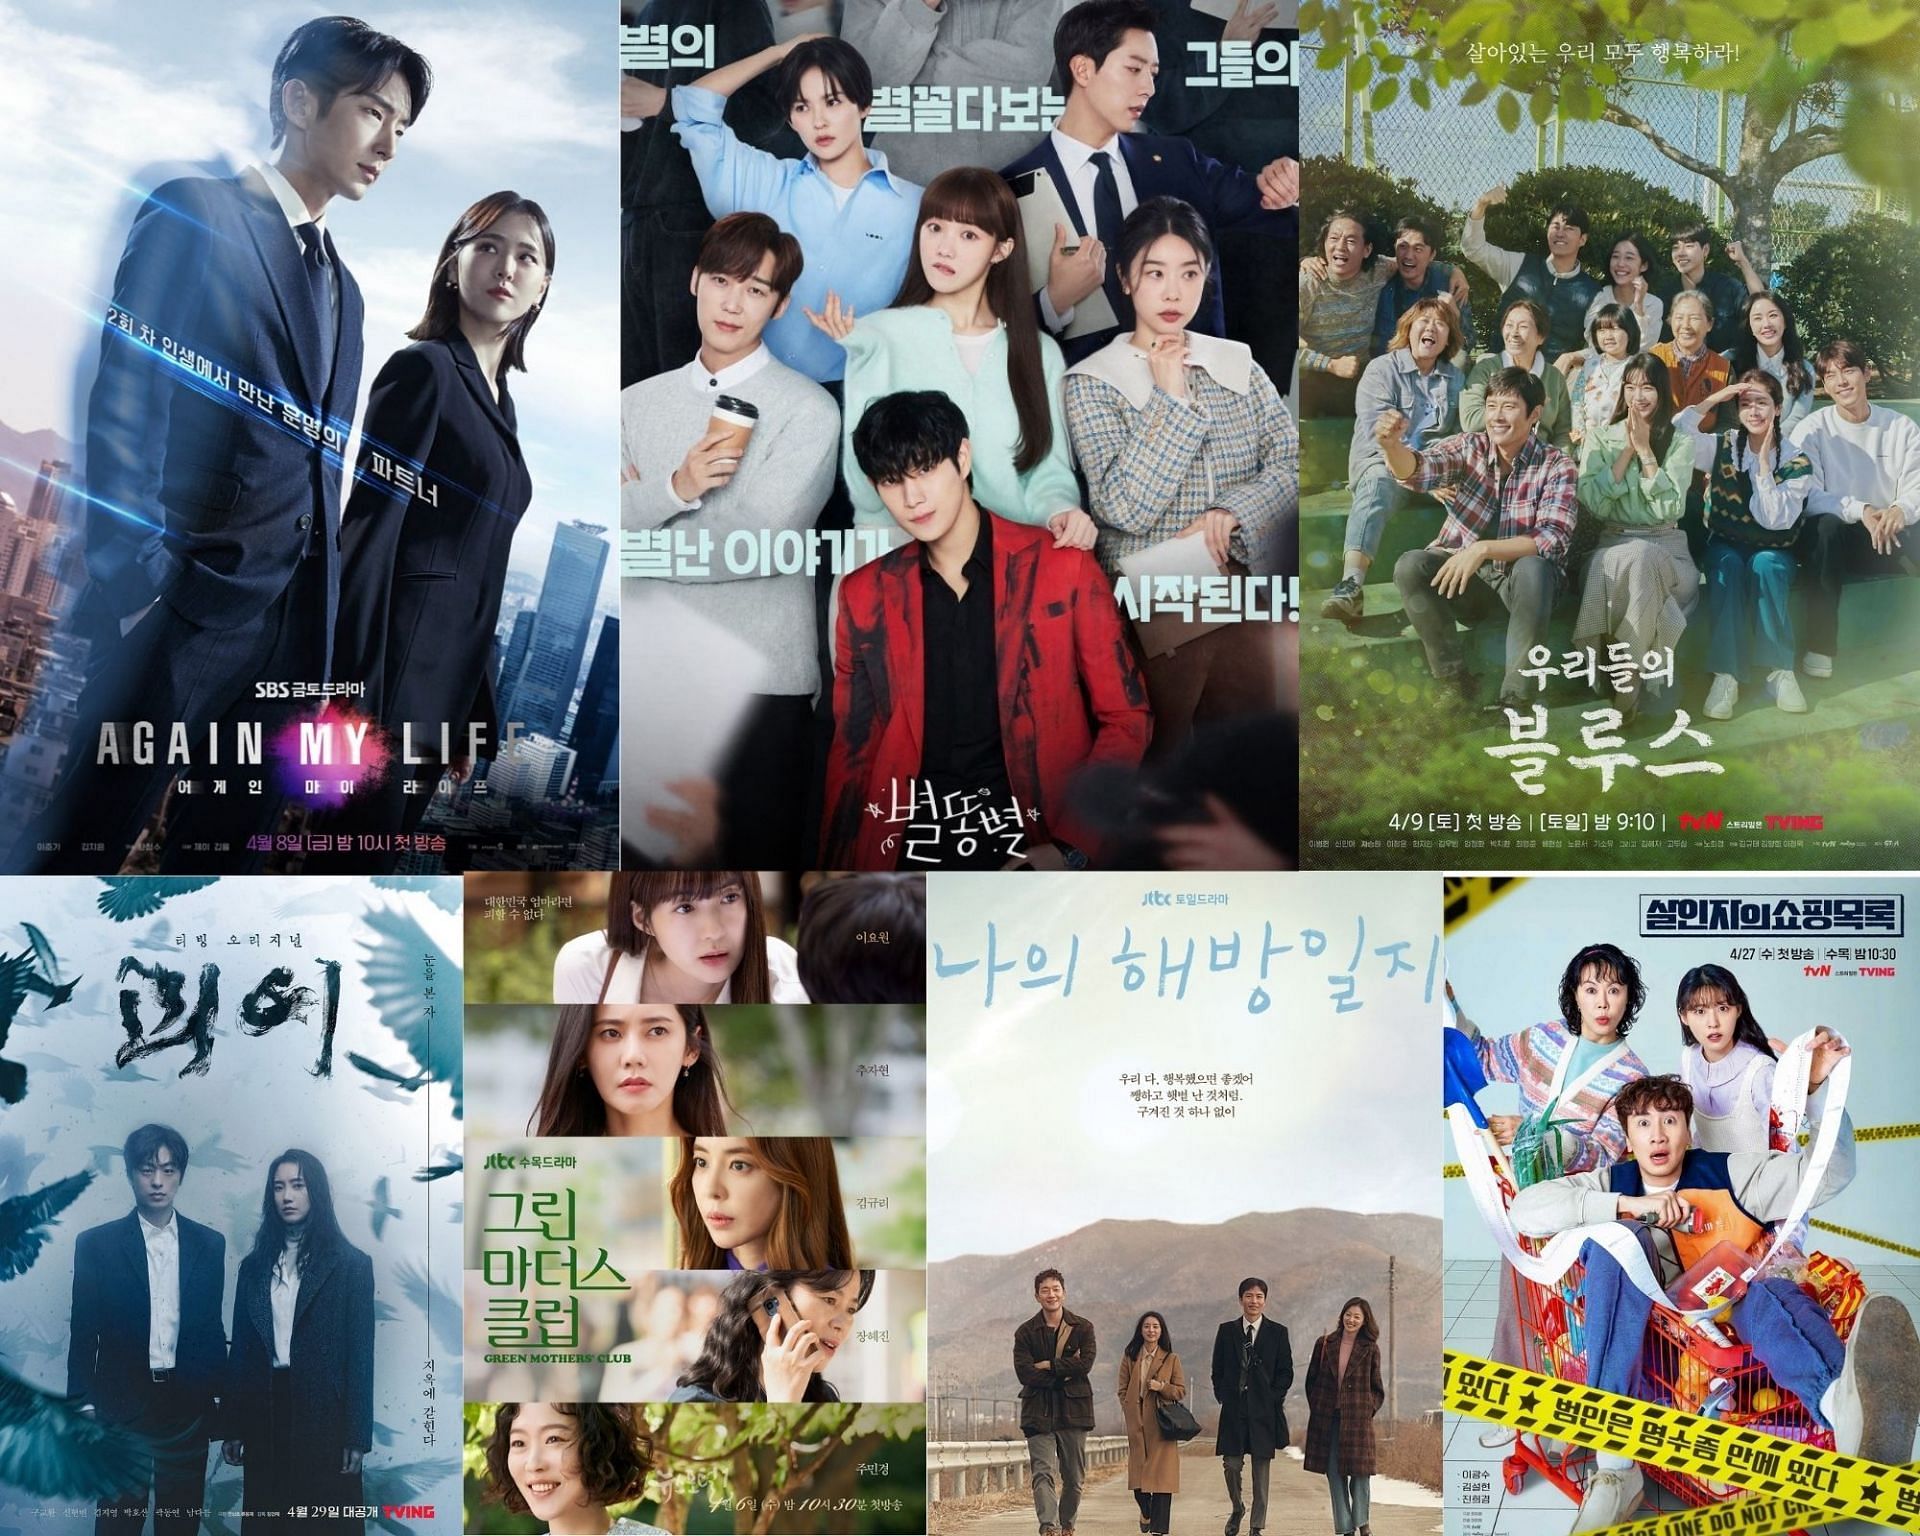 5 mustwatch Kdrama series to watch out for in April 2022